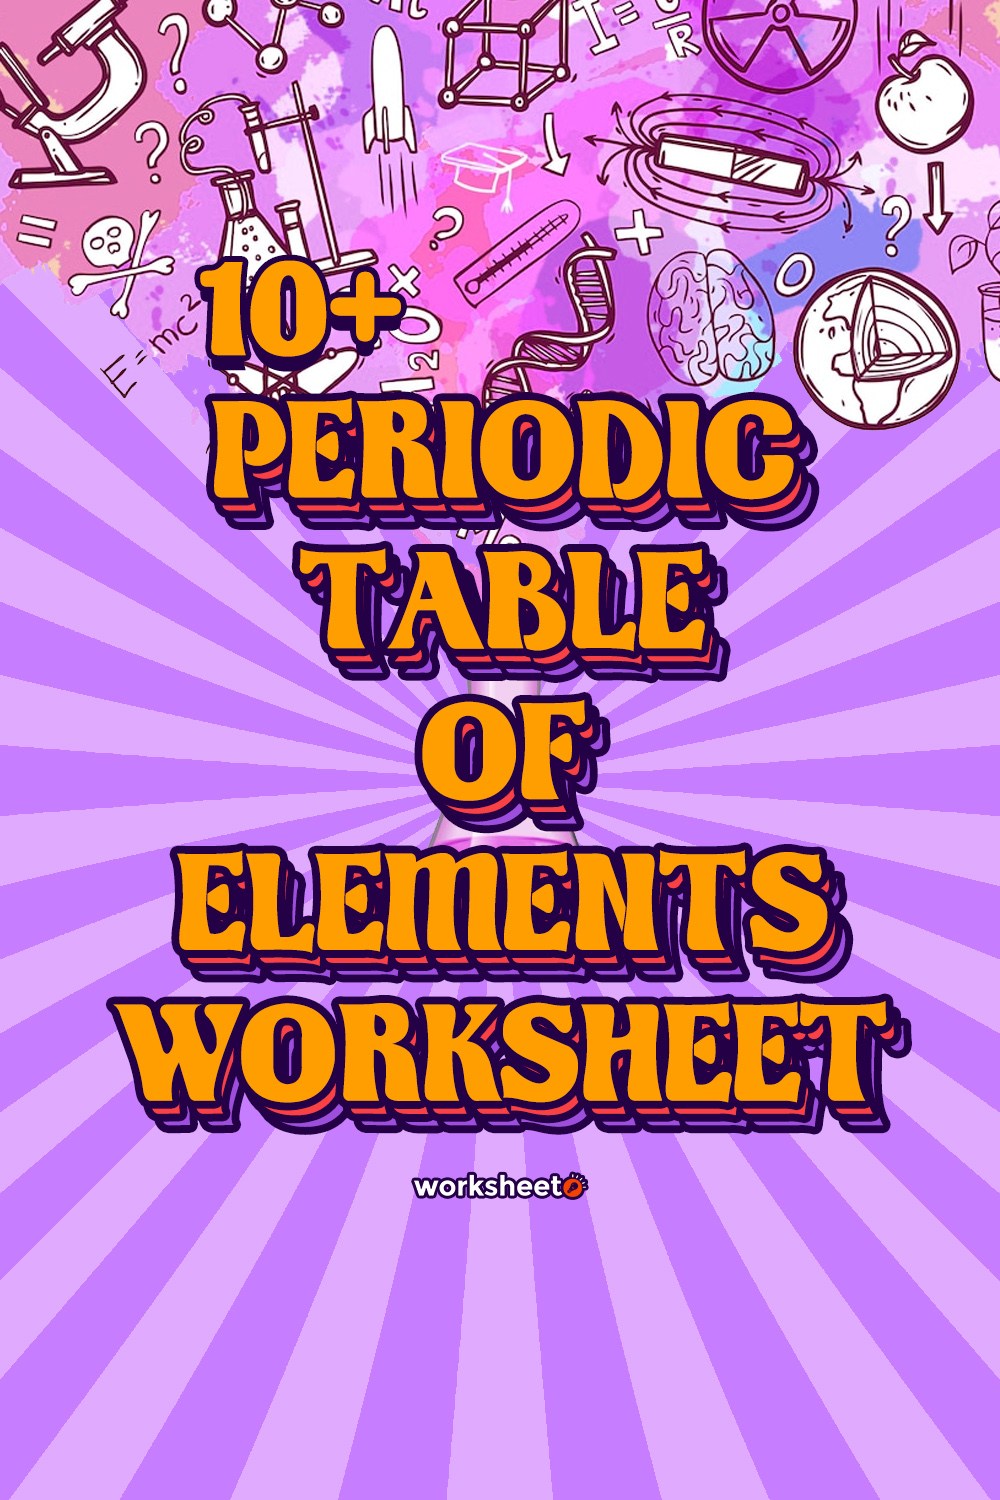 16 Images of Periodic Table Of Elements Worksheet